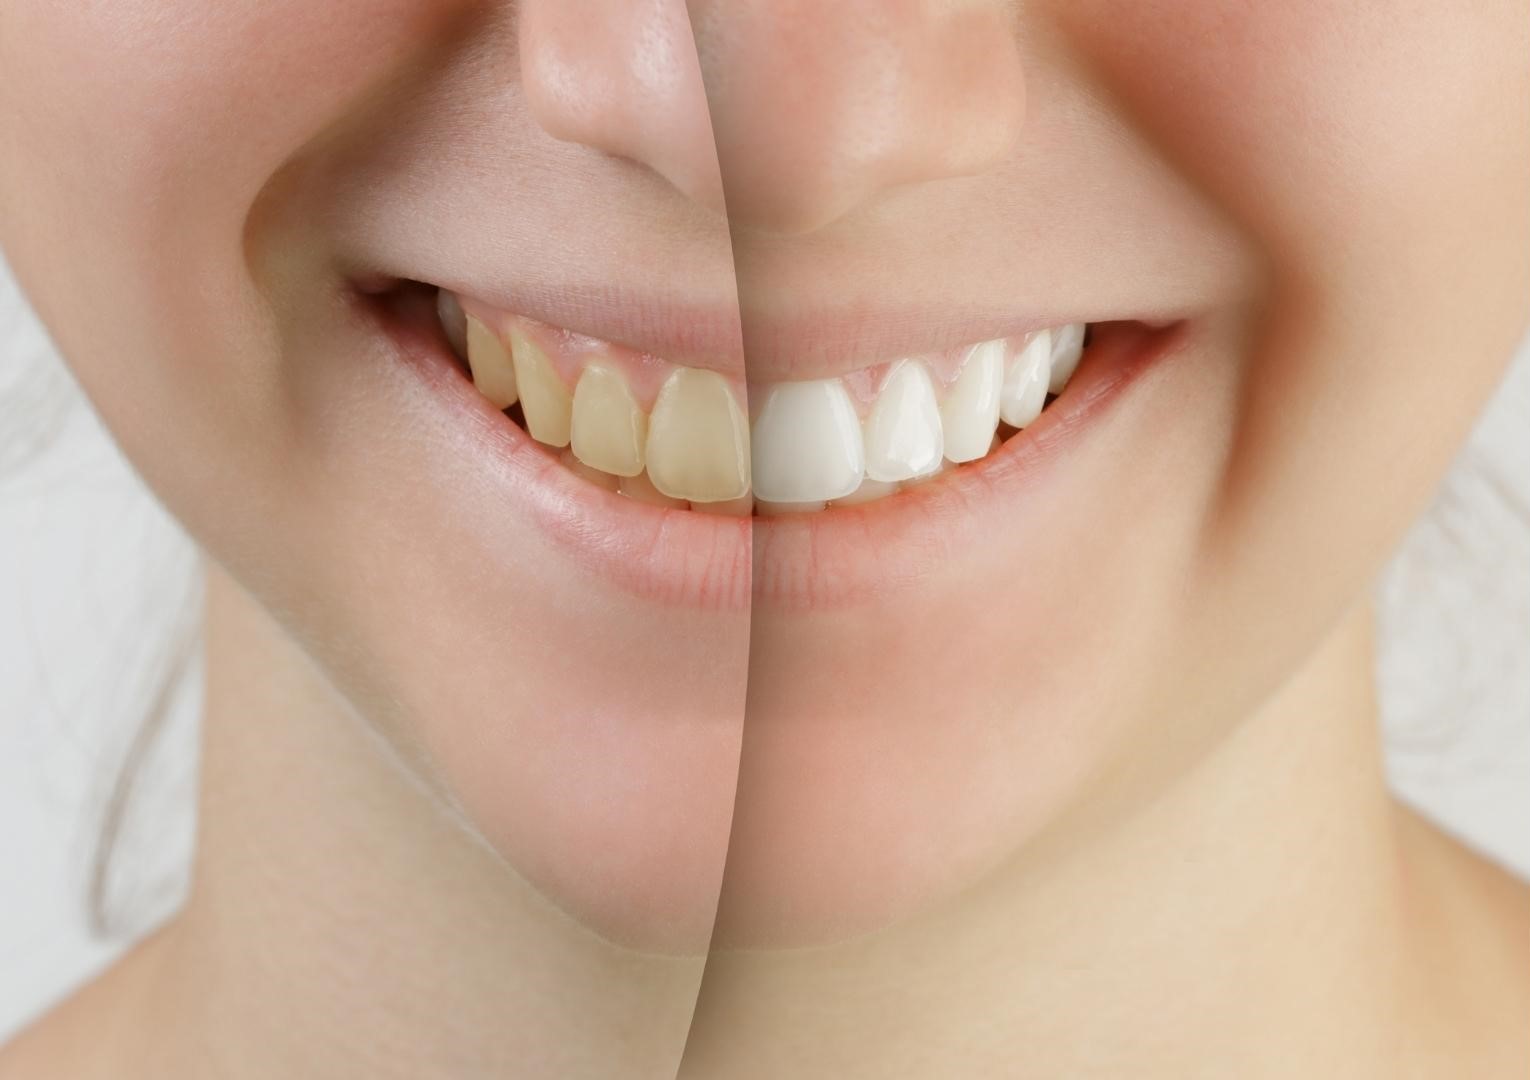 A before and after image of a woman who underwent teeth whitening treatment